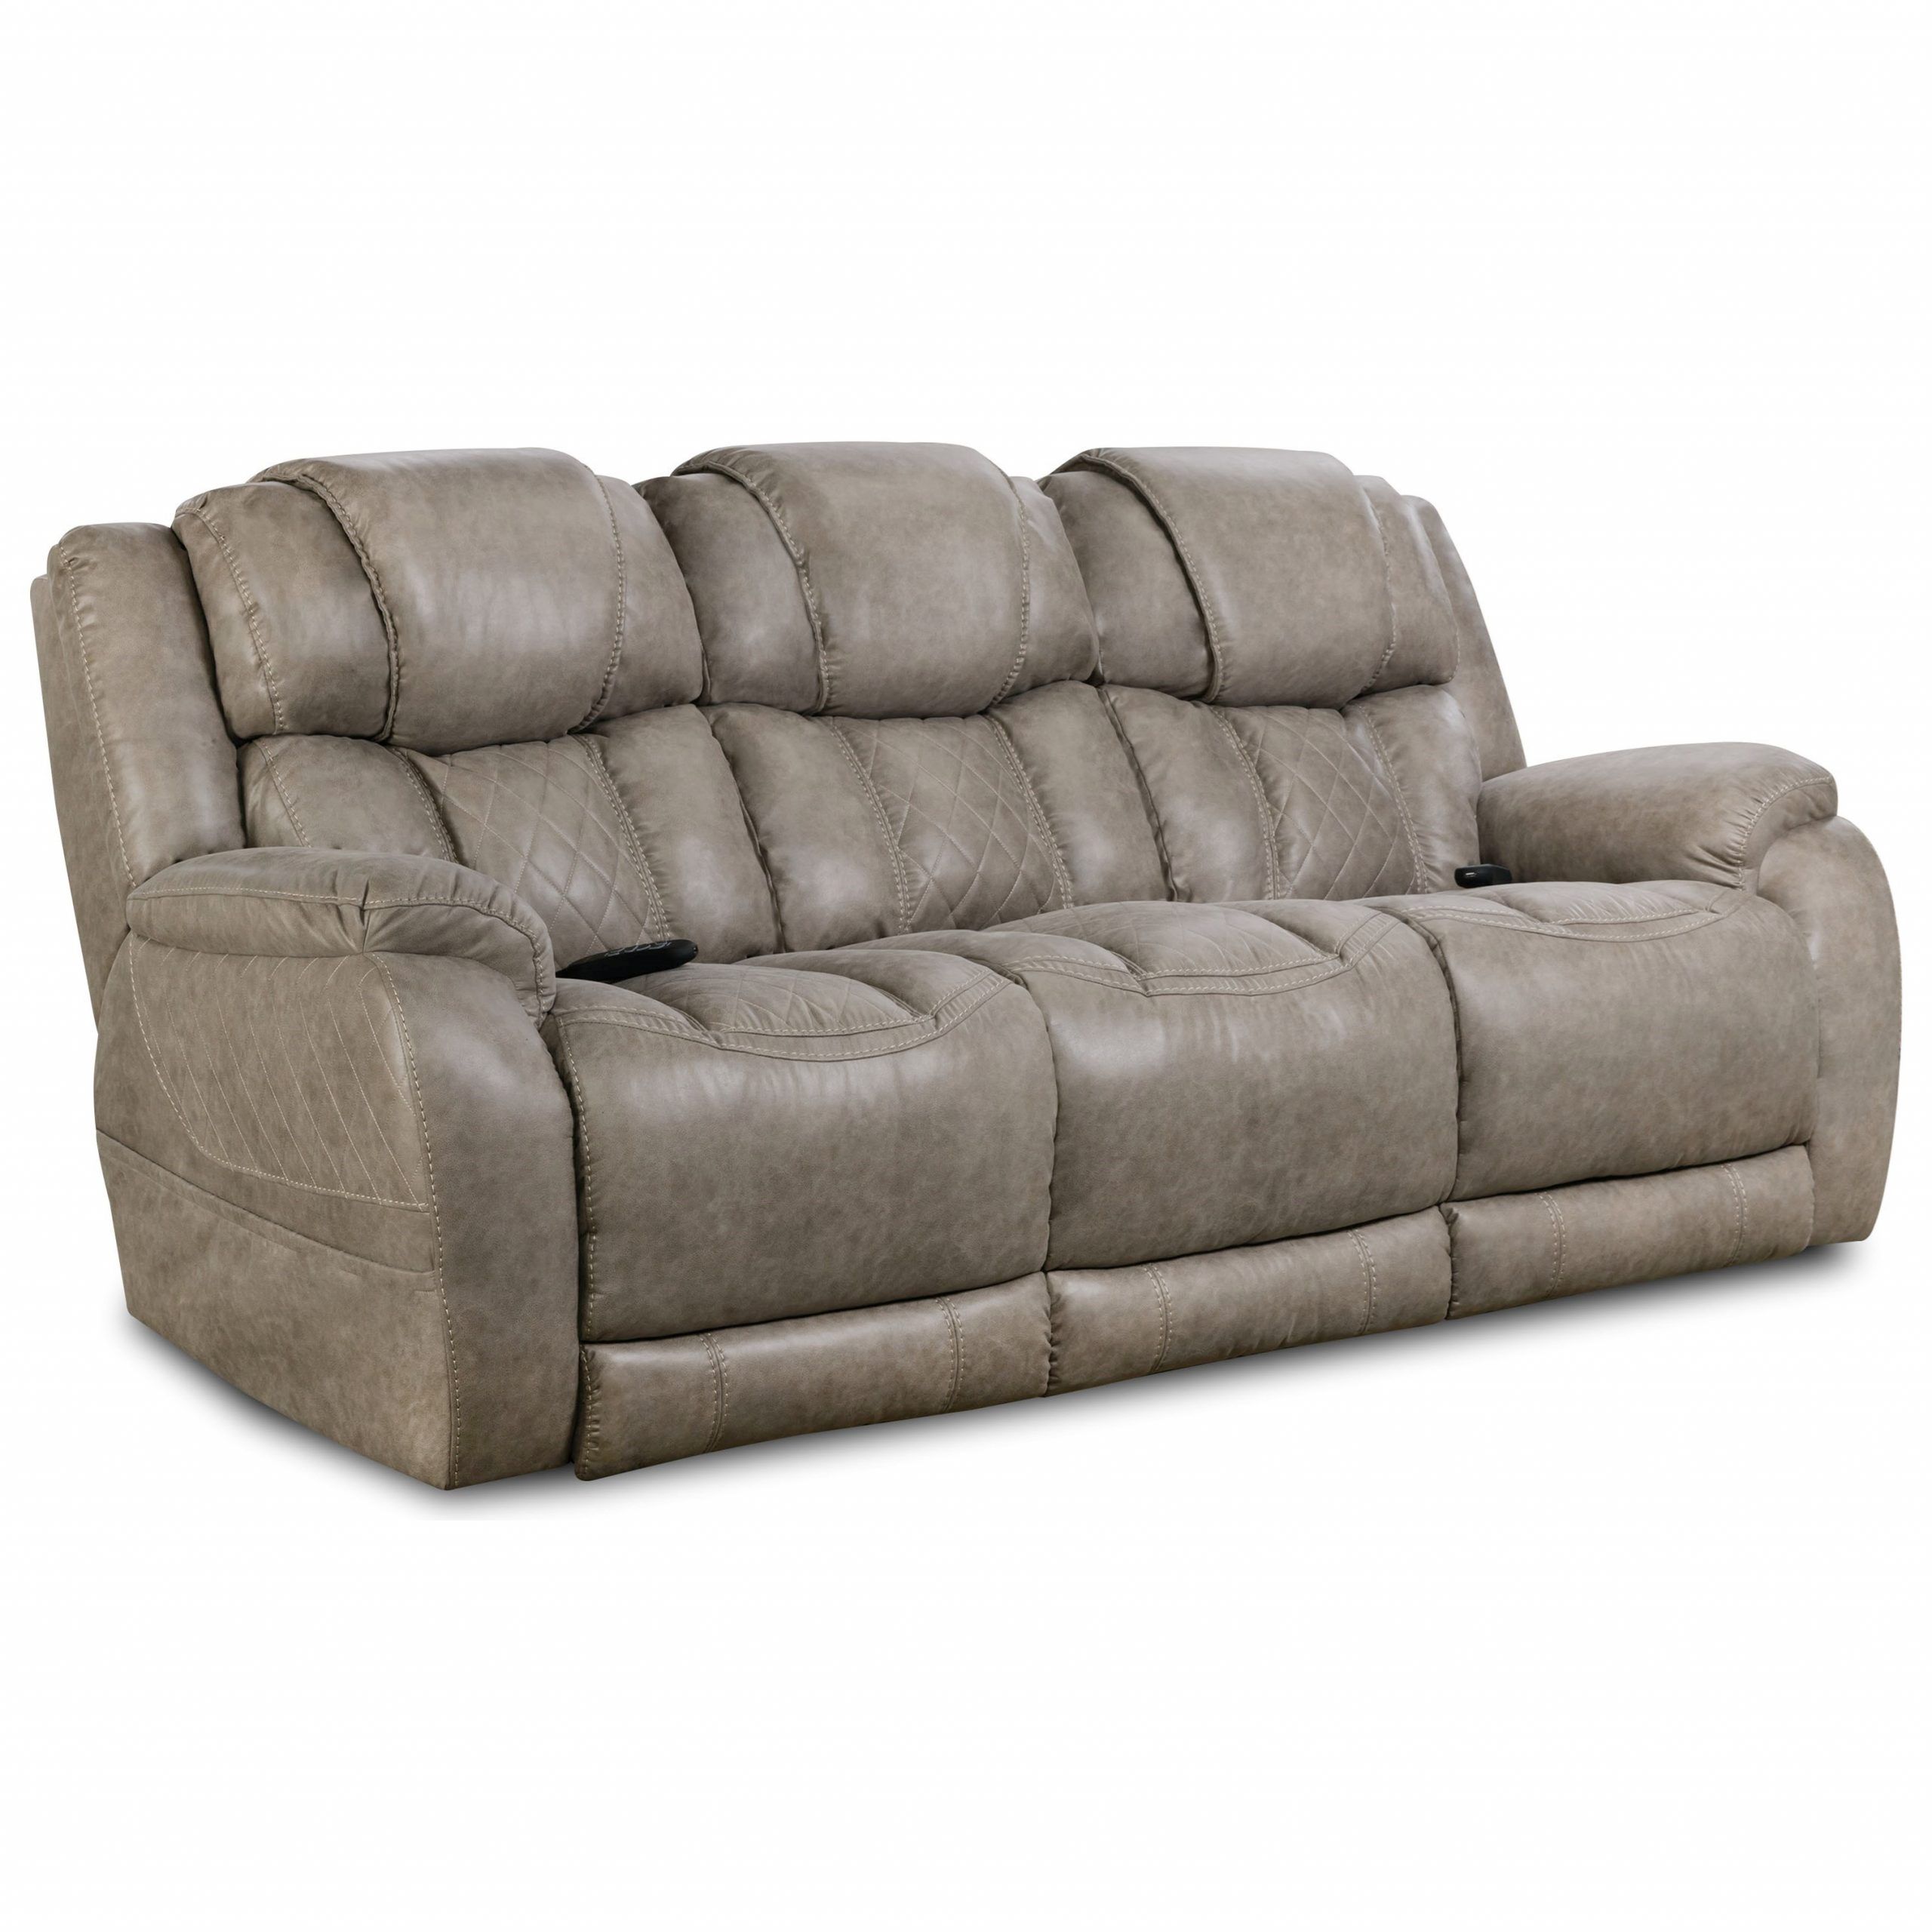 Homestretch 174 Casual Style Double Reclining Power Sofa Throughout Raven Power Reclining Sofas (View 10 of 15)